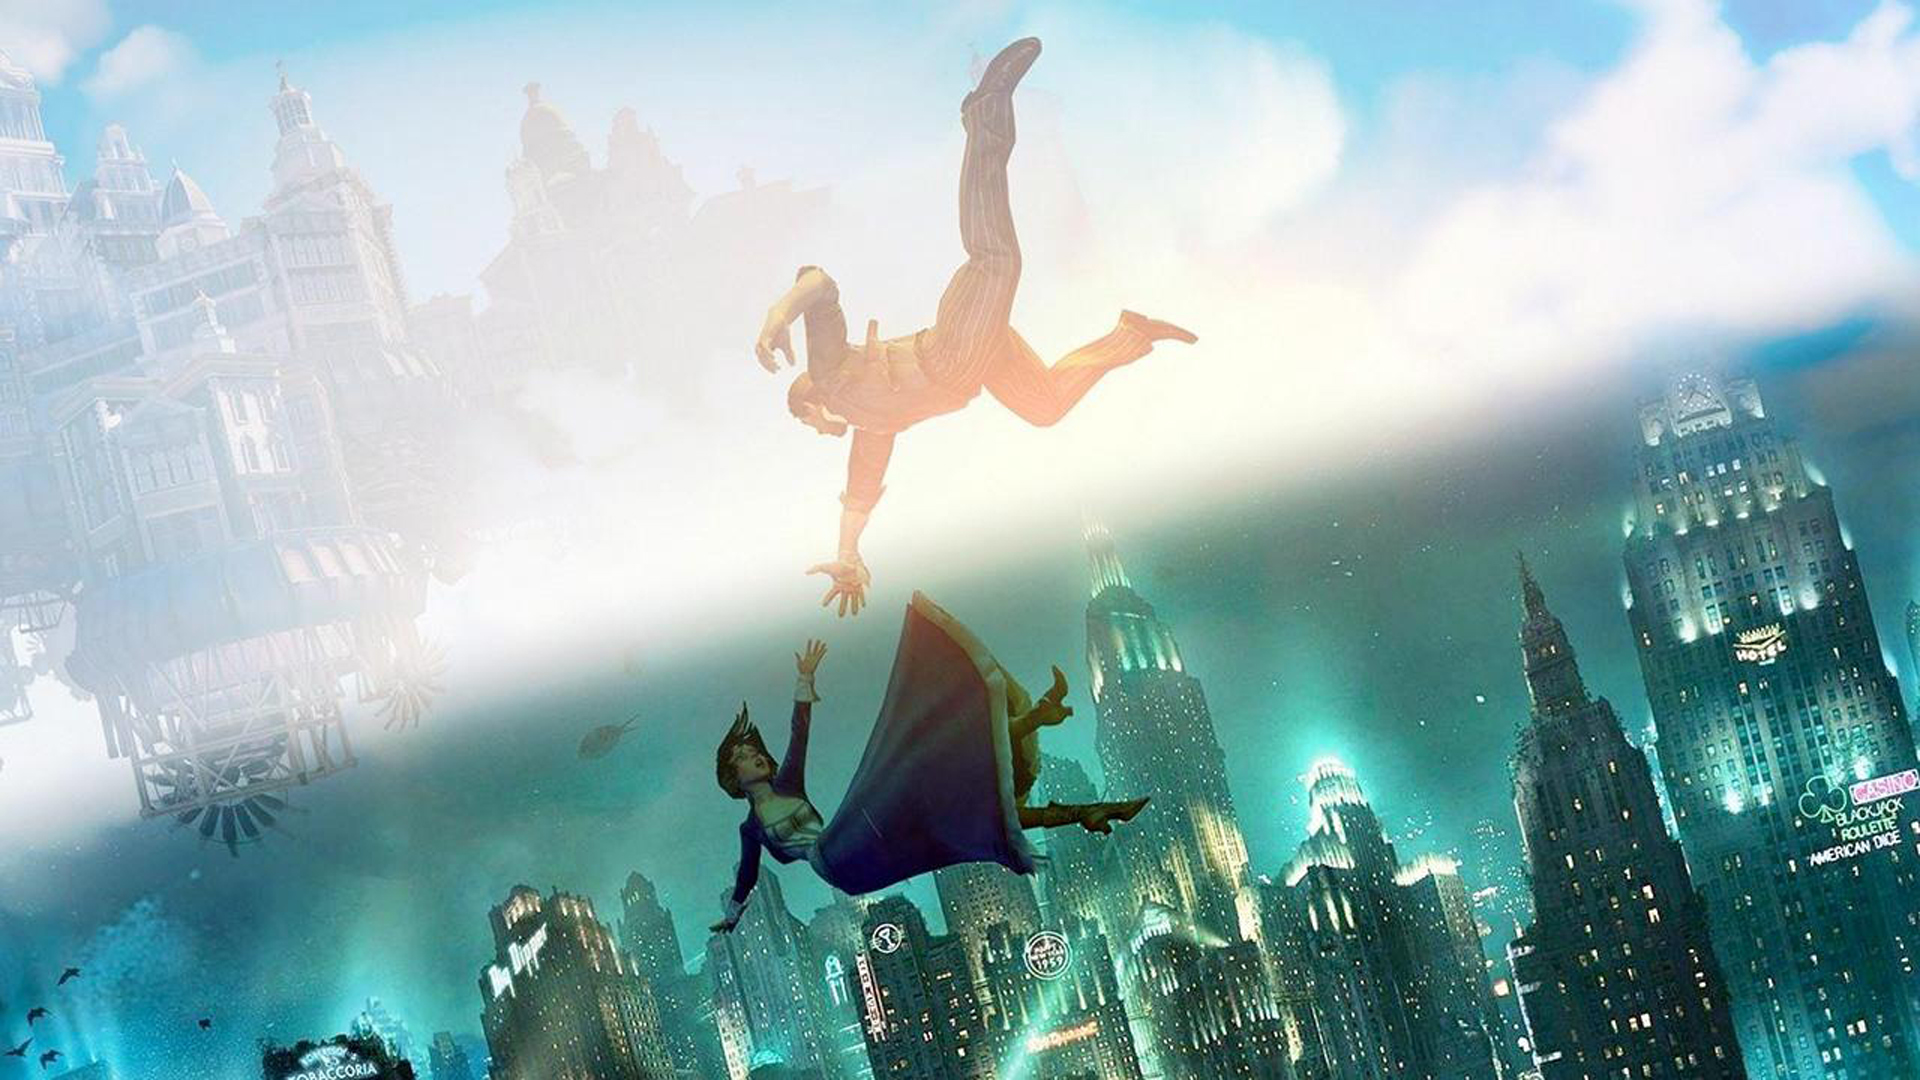 Netflix's BioShock movie has the rights to both Rapture and Columbia